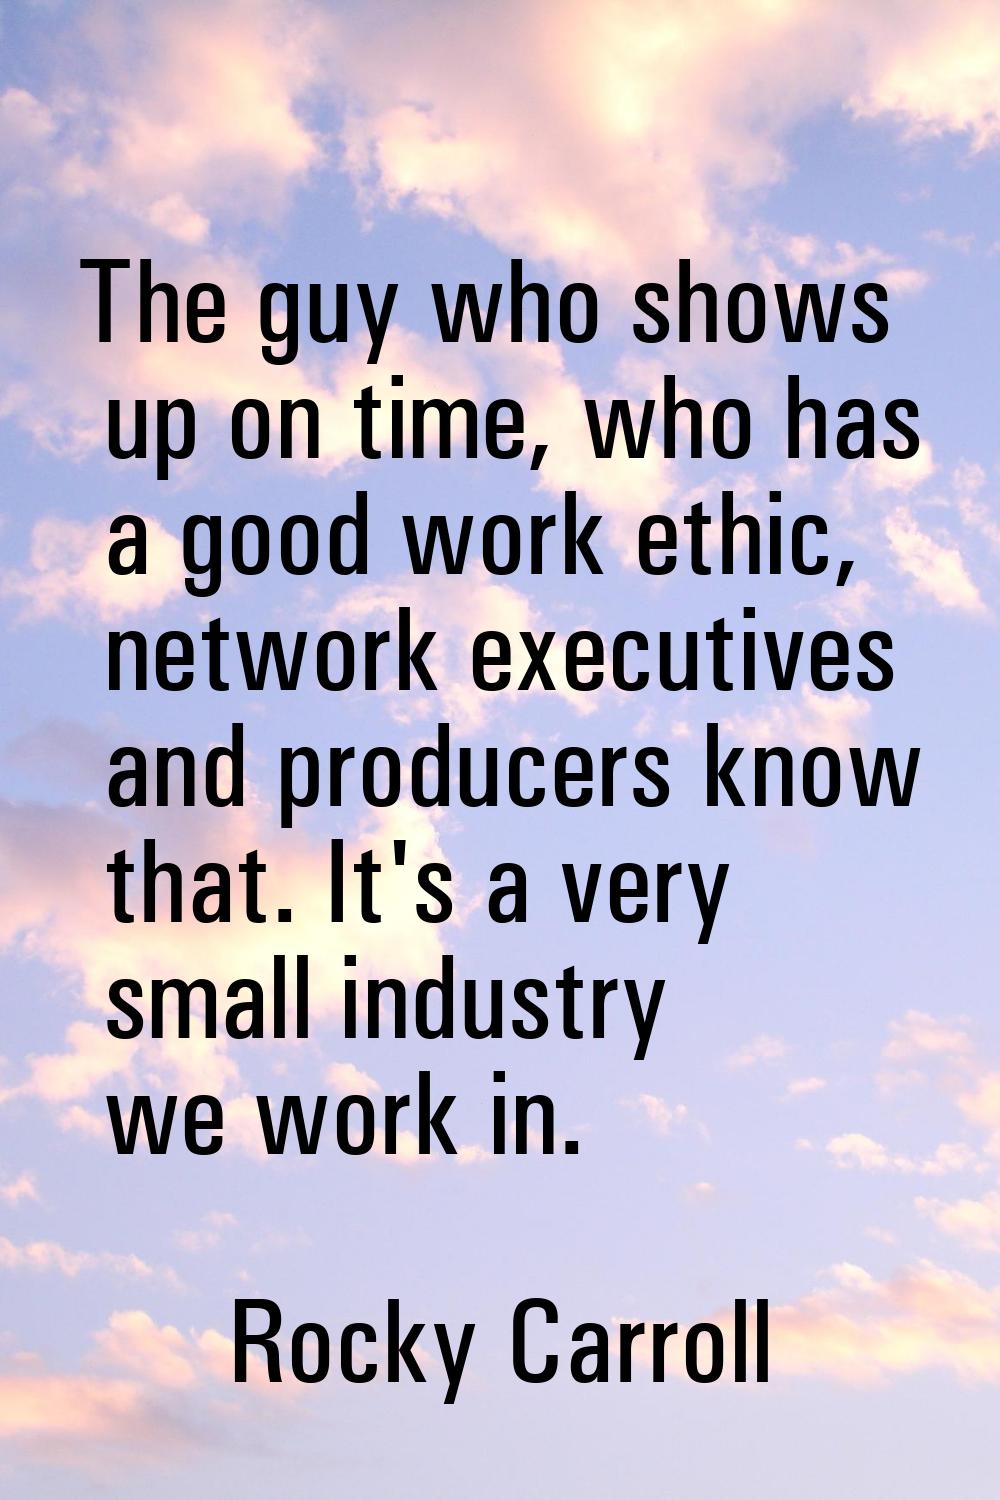 The guy who shows up on time, who has a good work ethic, network executives and producers know that